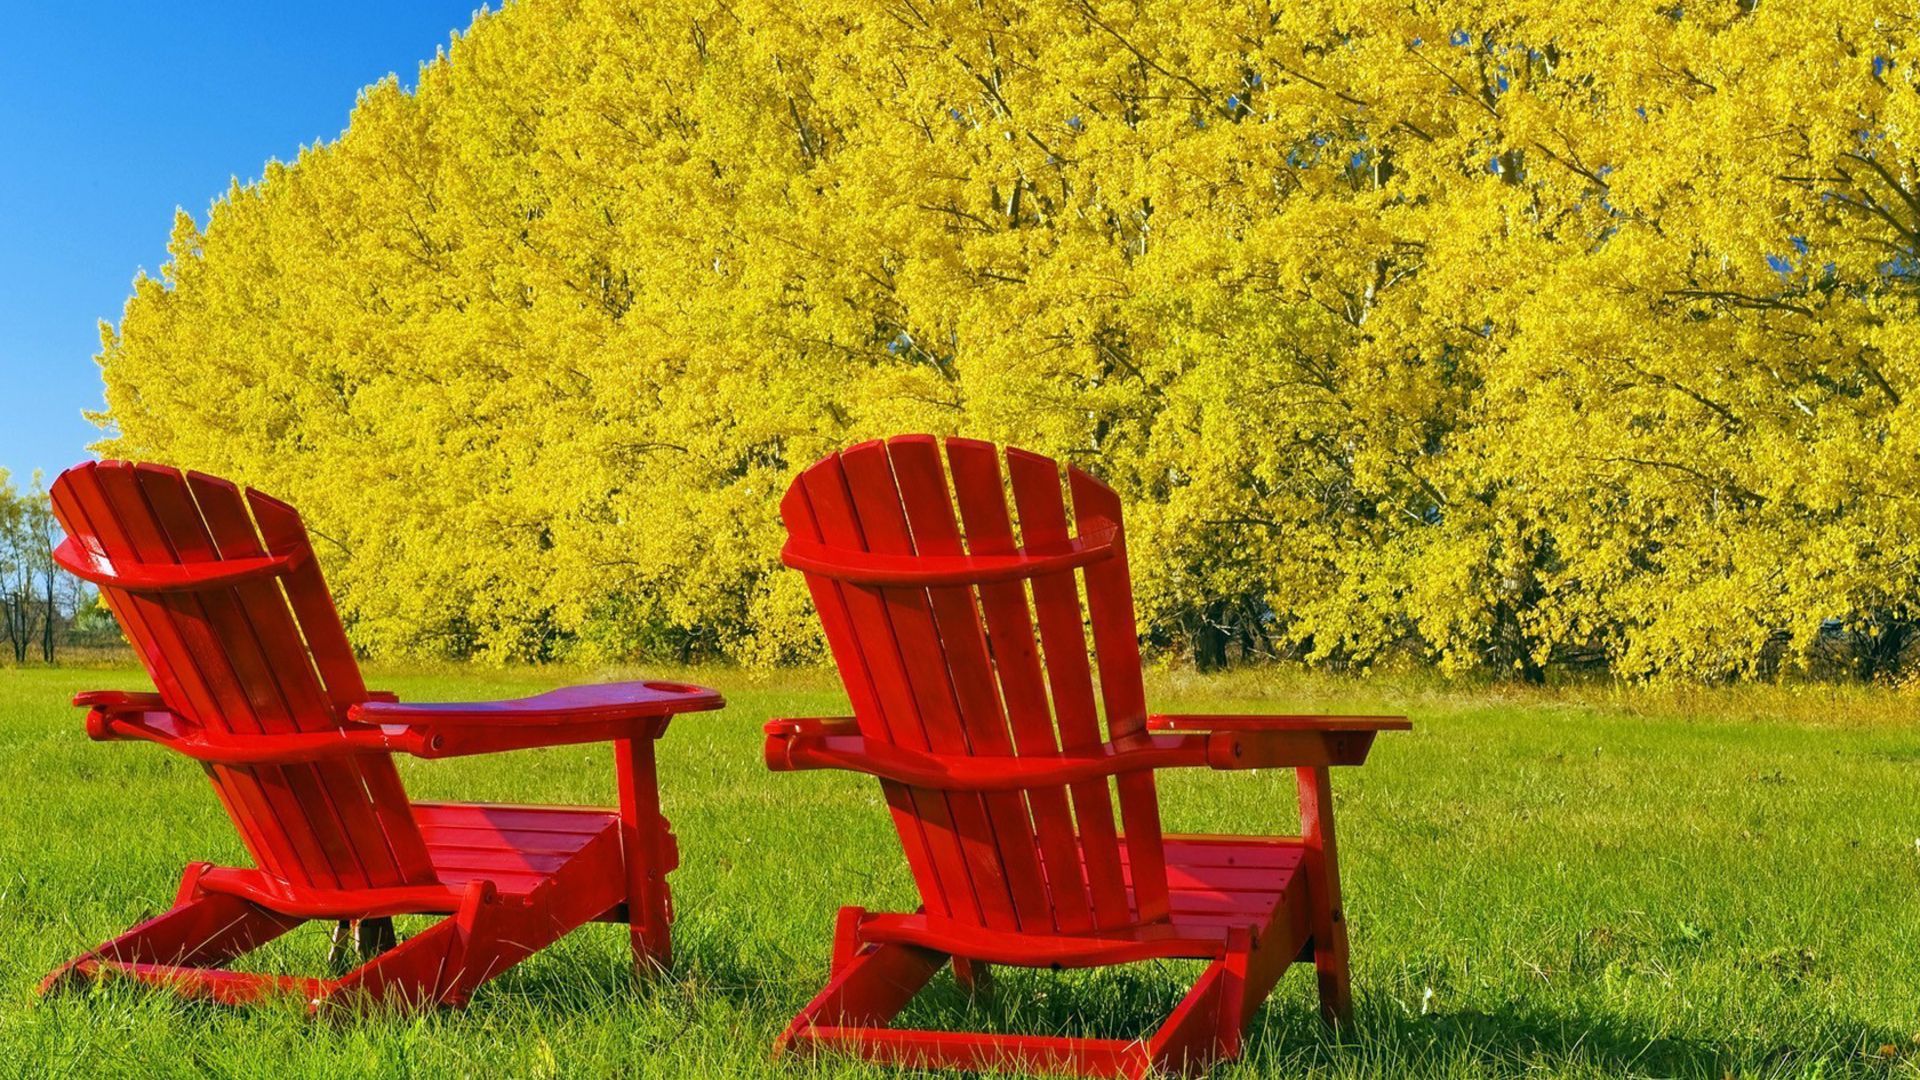 Photography Autumn Wallpaper Background 1920 X 1080: 438019 - Fall Picture, Red Chair, Chair